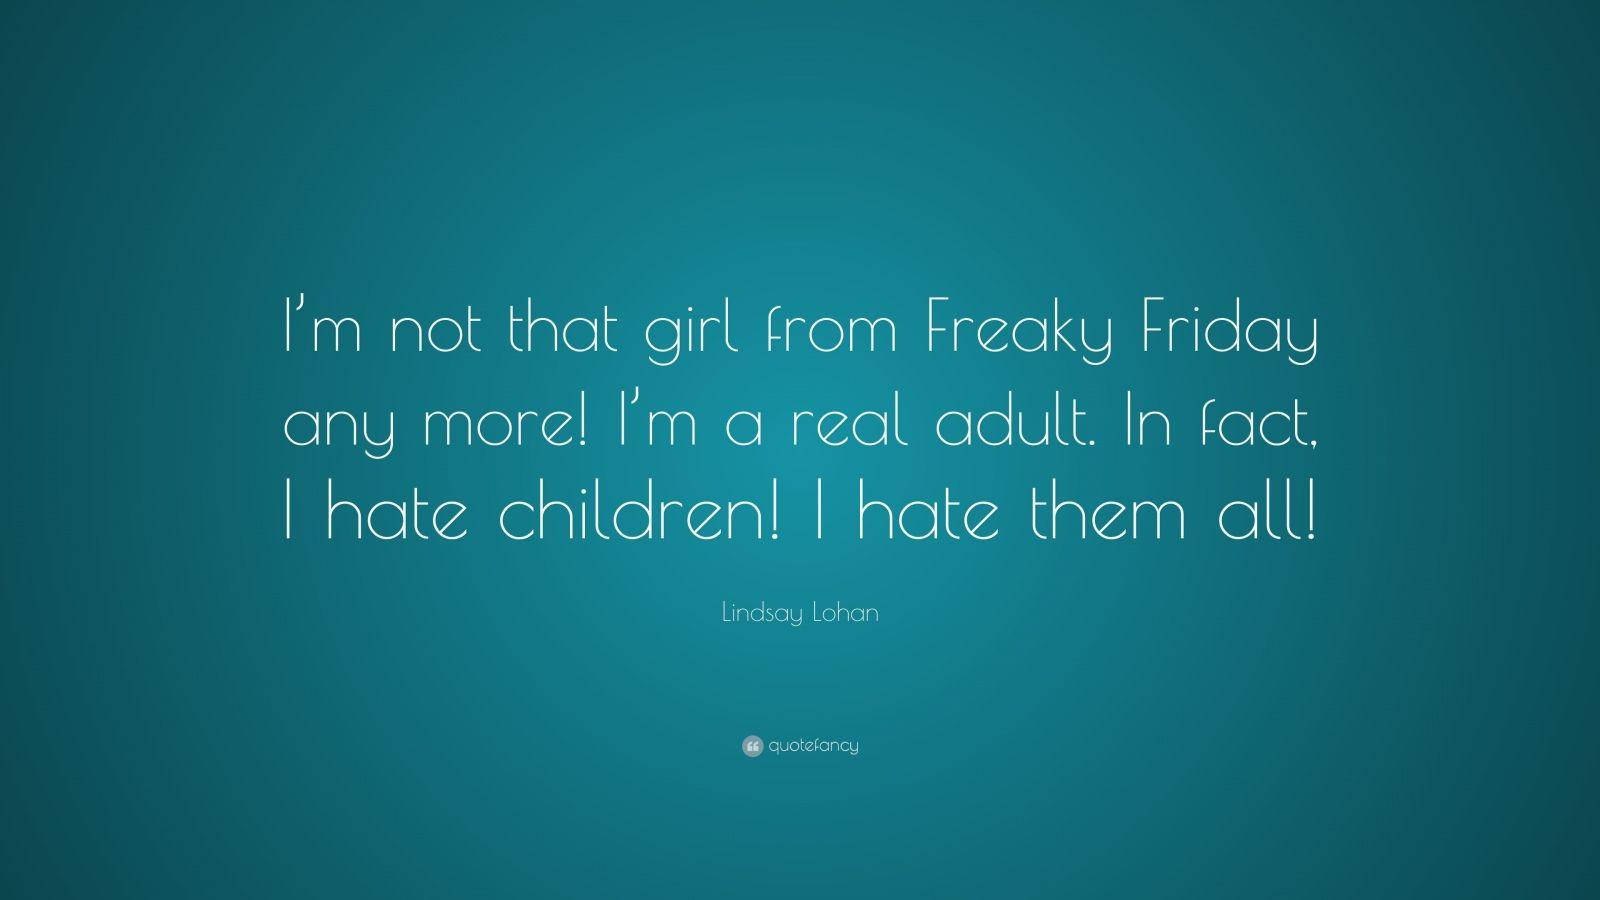 Download Freaky Friday Lindsay Lohan Quote On Green Wallpaper |  Wallpapers.com